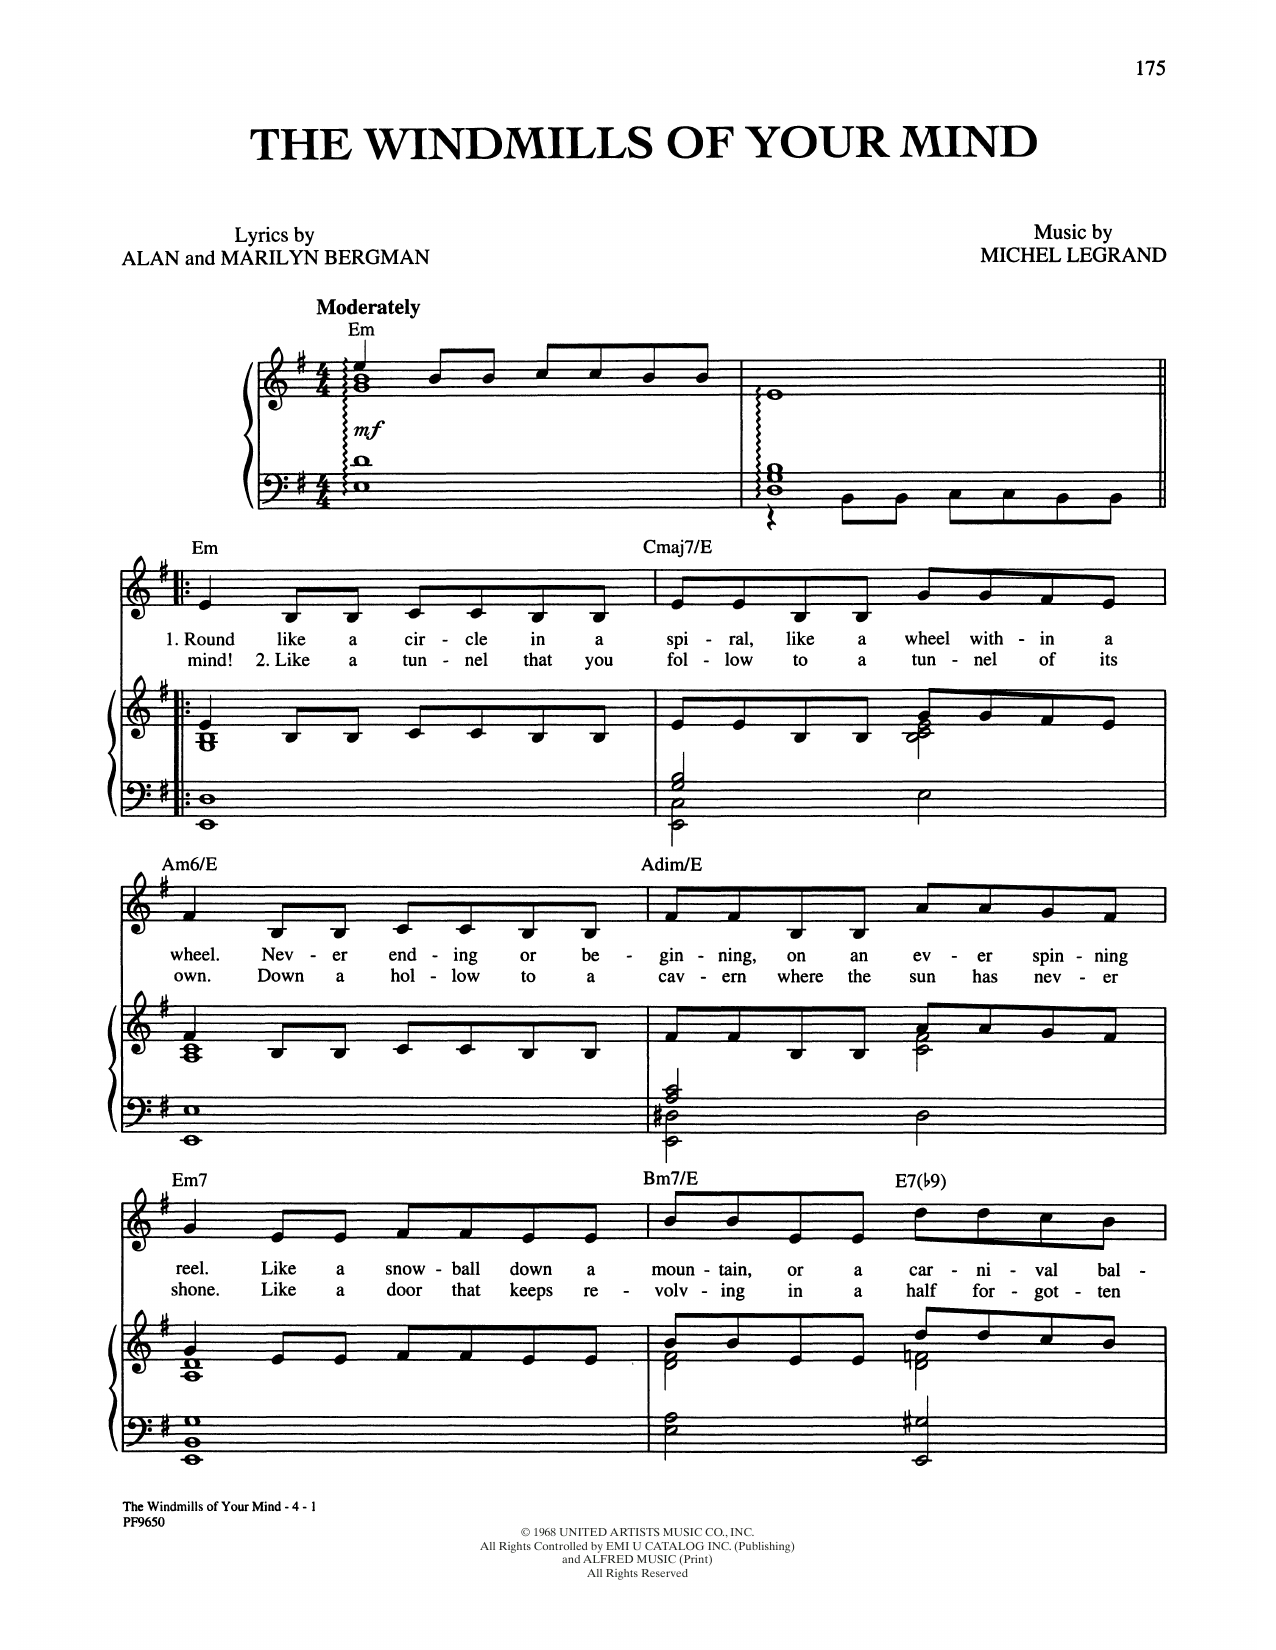 Download Alan and Marilyn Bergman and Michel The Windmills Of Your Mind Sheet Music